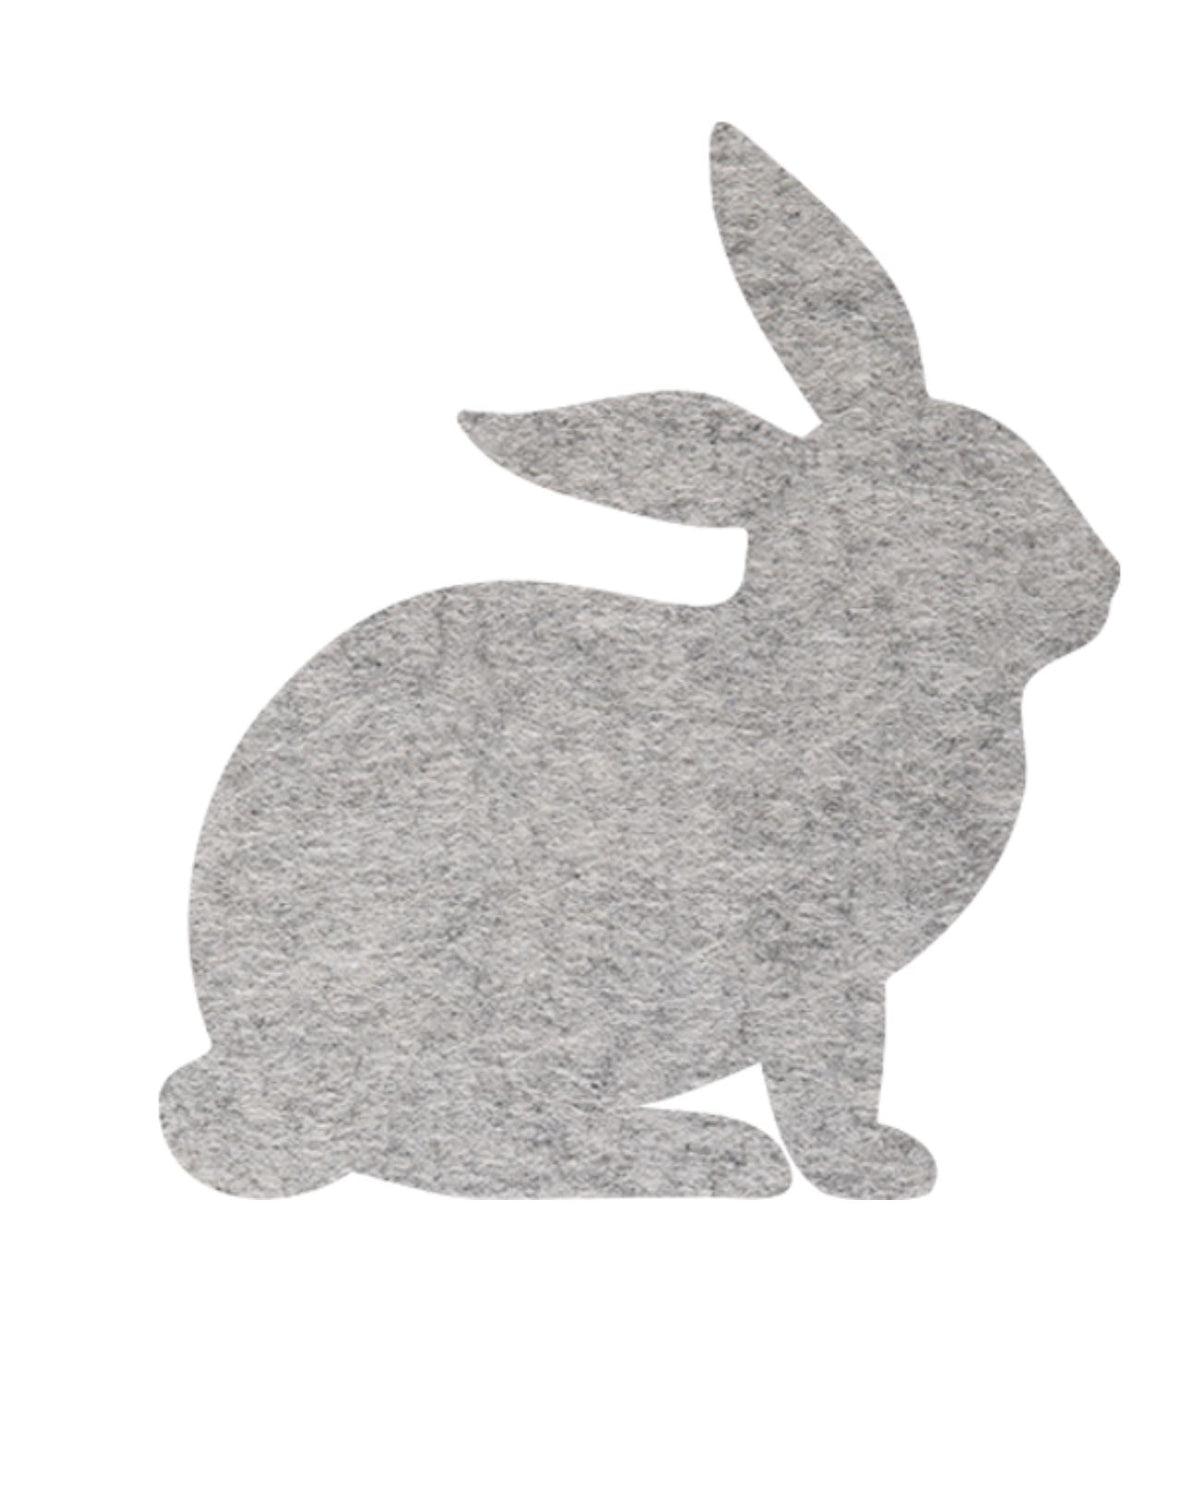 Our light grey Bunny Pinboards have a beautiful felt-like appearance, and they are amazing to touch as well as visually appealing in all living spaces. They come with easy peel and stick tabs for your wall, making them ready for pinning straight away. Perfect over a desk or to decorate a kid's bedroom.